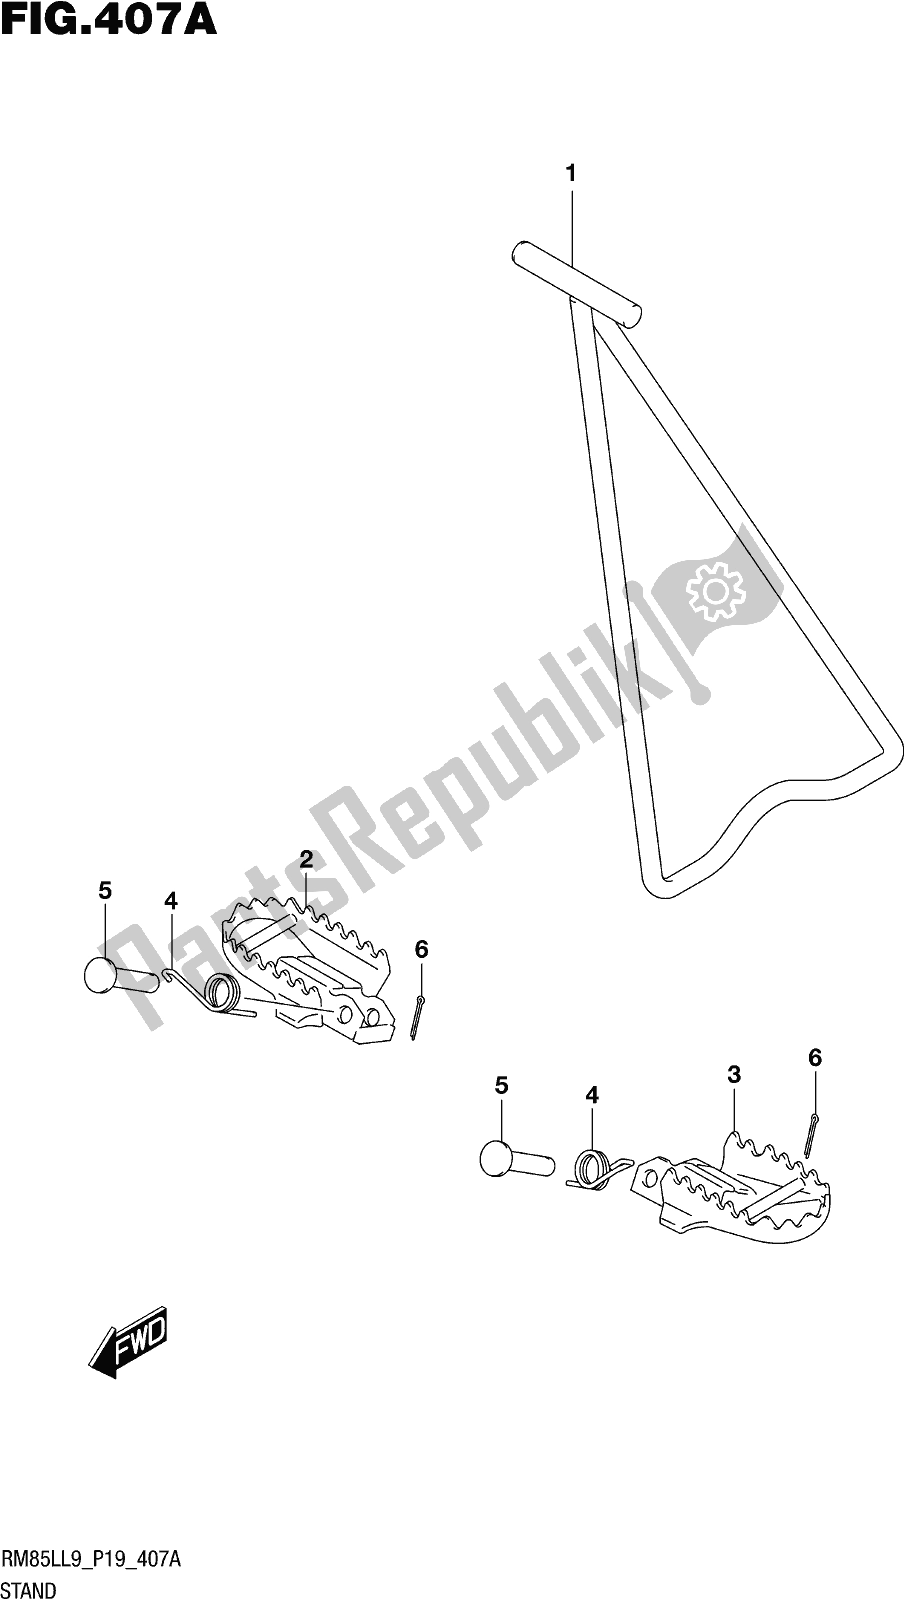 All parts for the Fig. 407a Stand of the Suzuki RM 85L 2019